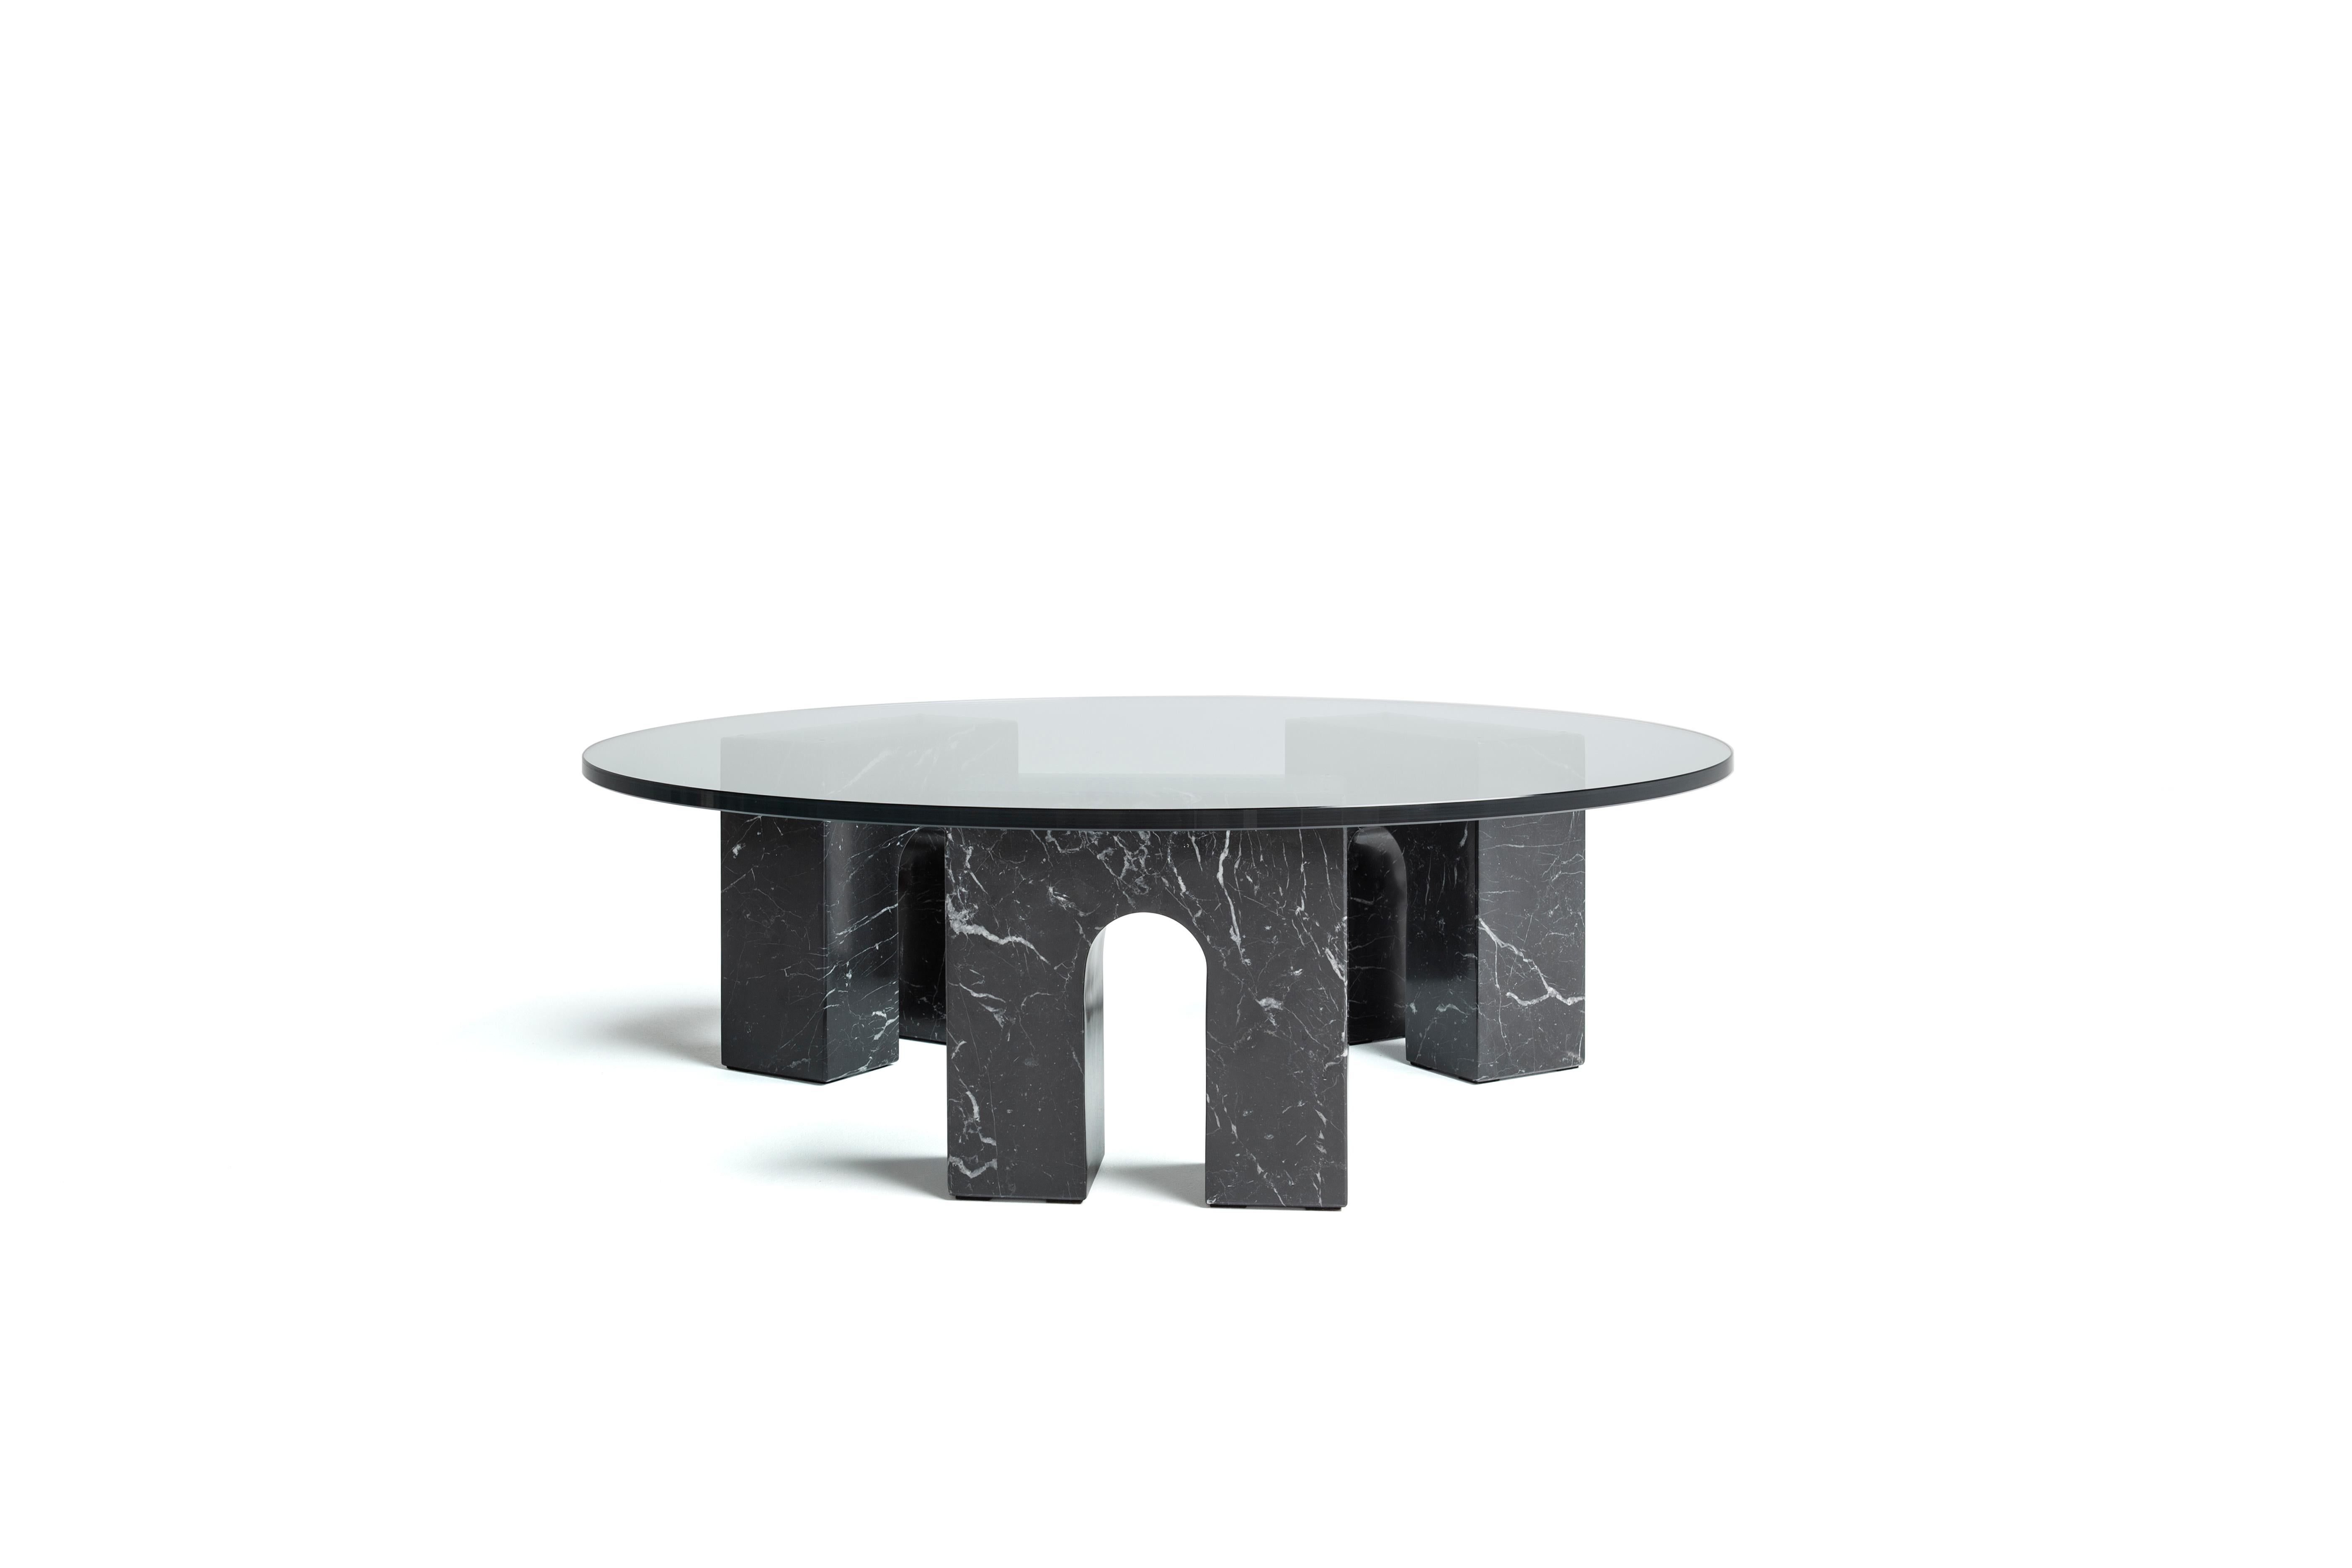 Triumph Marquina marble table by Joseph Vila Capdevila
Materials: Marquina marble, tempered glass
Dimensions: ø 94 x 29.5 cm
Weight: 21 kg

Luxurious mirror in two separated parts: the base, made with premium Carrara marble, and mirror, that